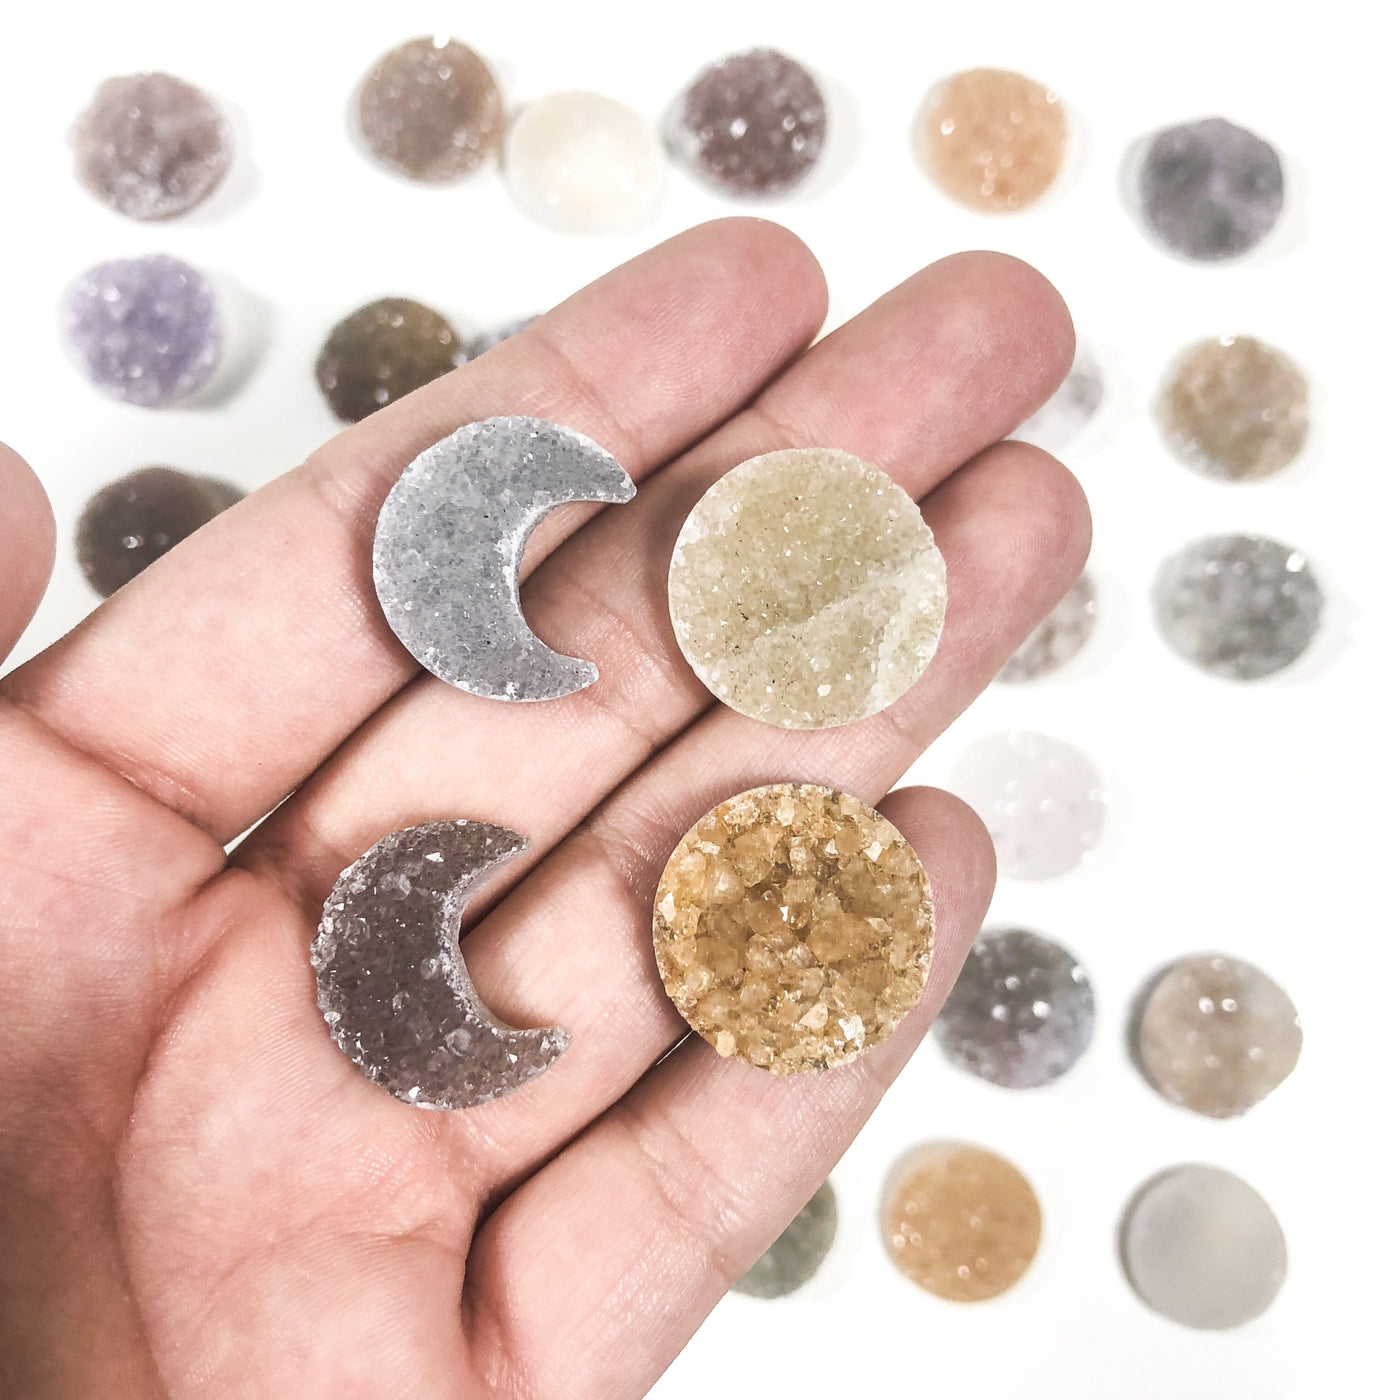 Druzy Moon Crescent and Circle Cabochons in hand for size reference